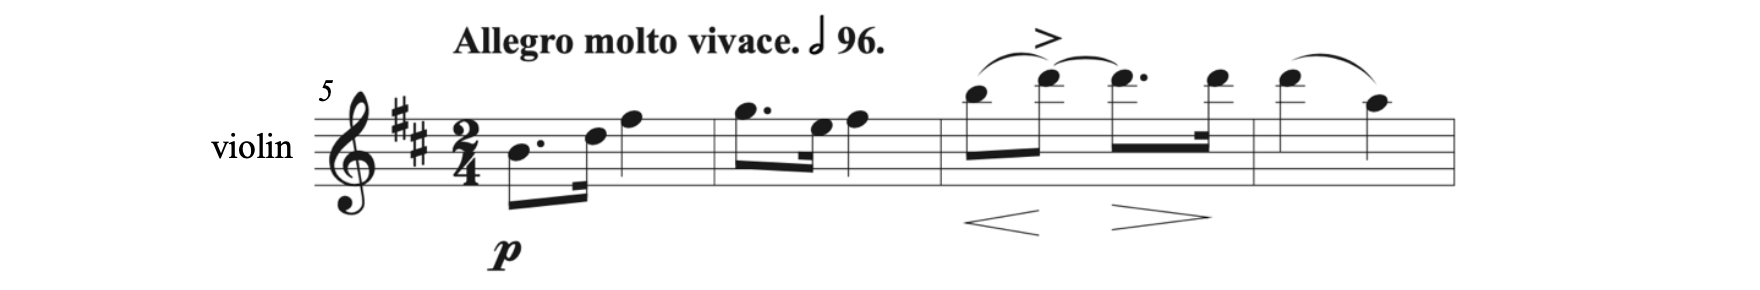 The specific tempo marking of Röntgen-Maier's Violin Sonata in B Minor, third movement is Allegro molto vivace with a half note equaling 96 beats per minute.